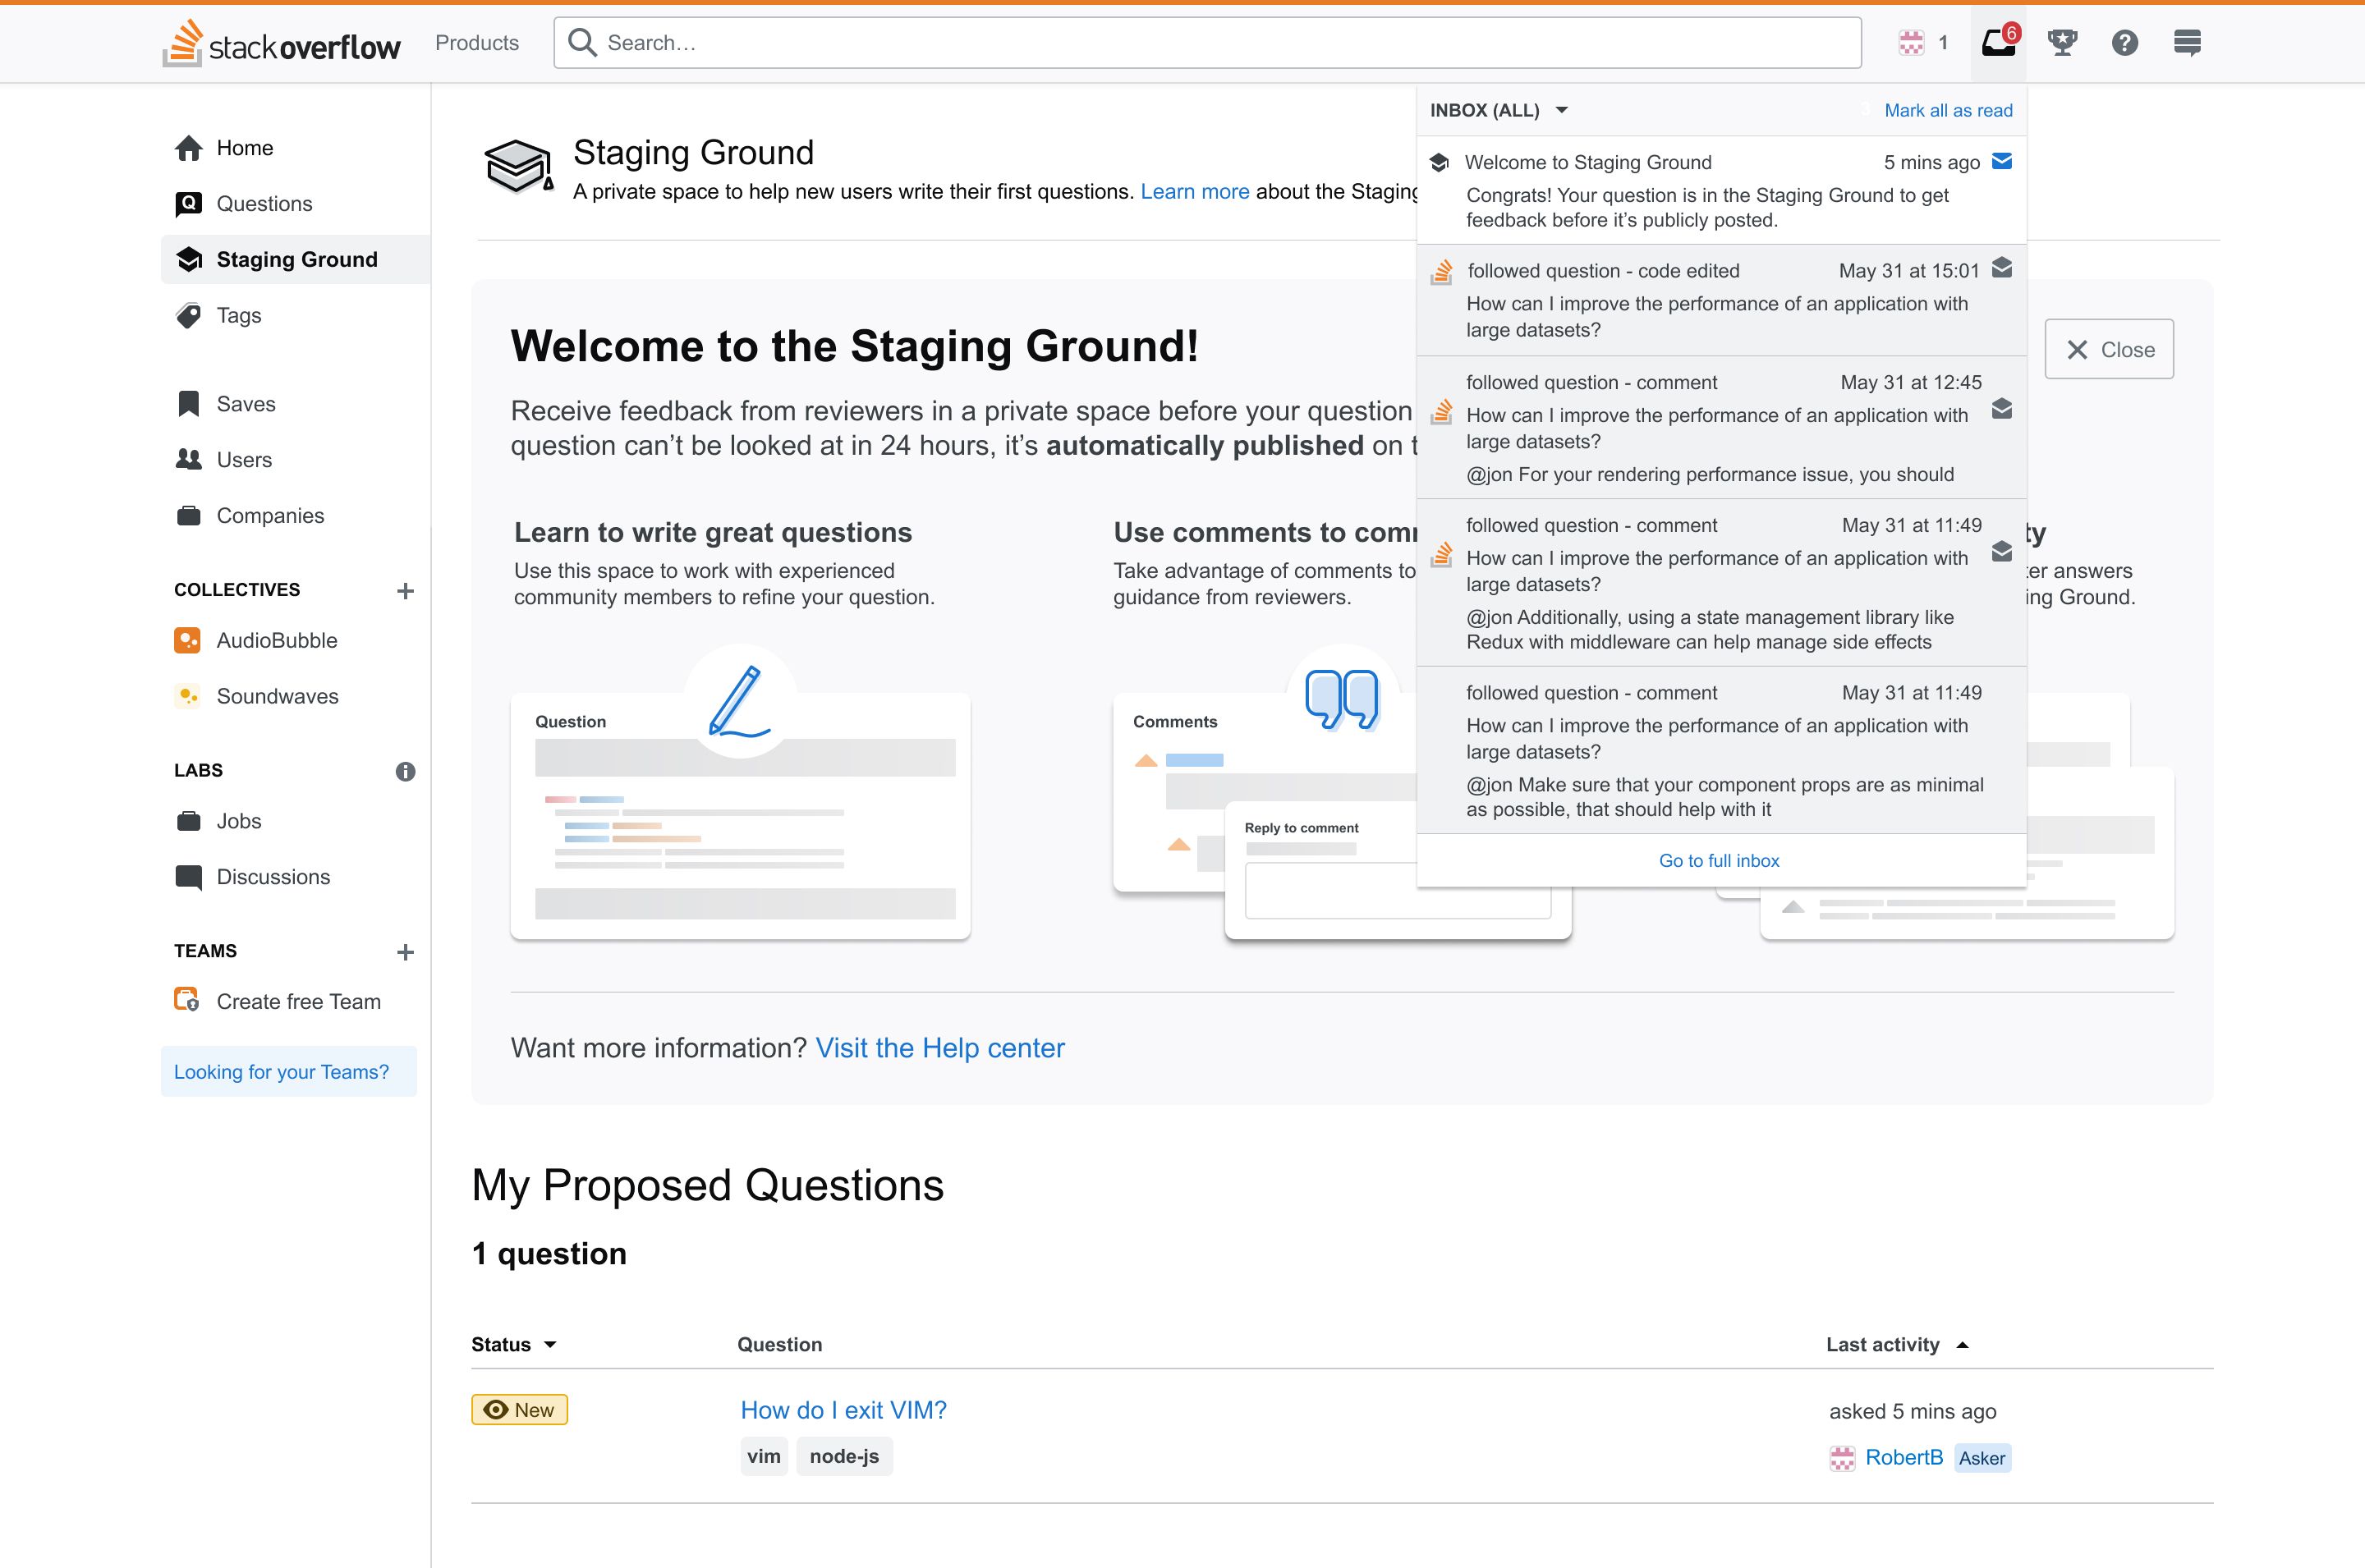 A screenshot of the Staging Ground home page on Stack Overflow displaying the Staging Ground icon on the left sidebar and Staging Ground inbox notifications.